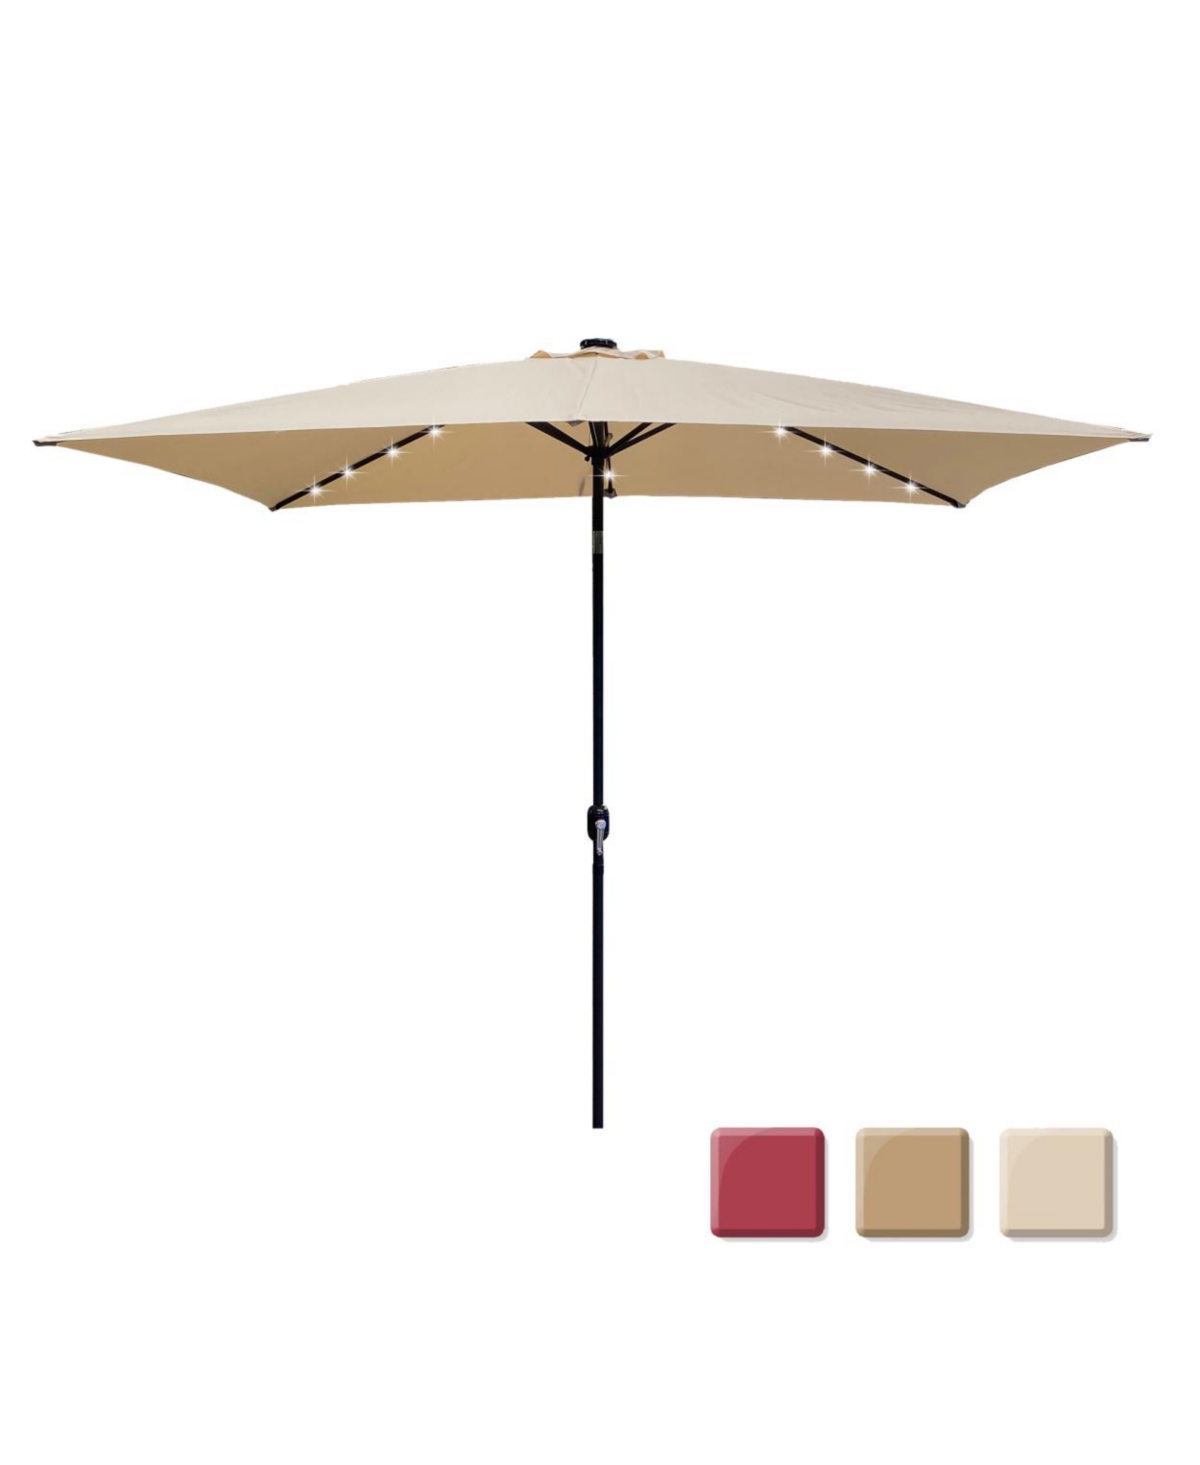 Outdoor Patio Umbrella 10 Ft X 6.5 Ft Rectangular With Crank Weather Resistant Uv Protection - Brown